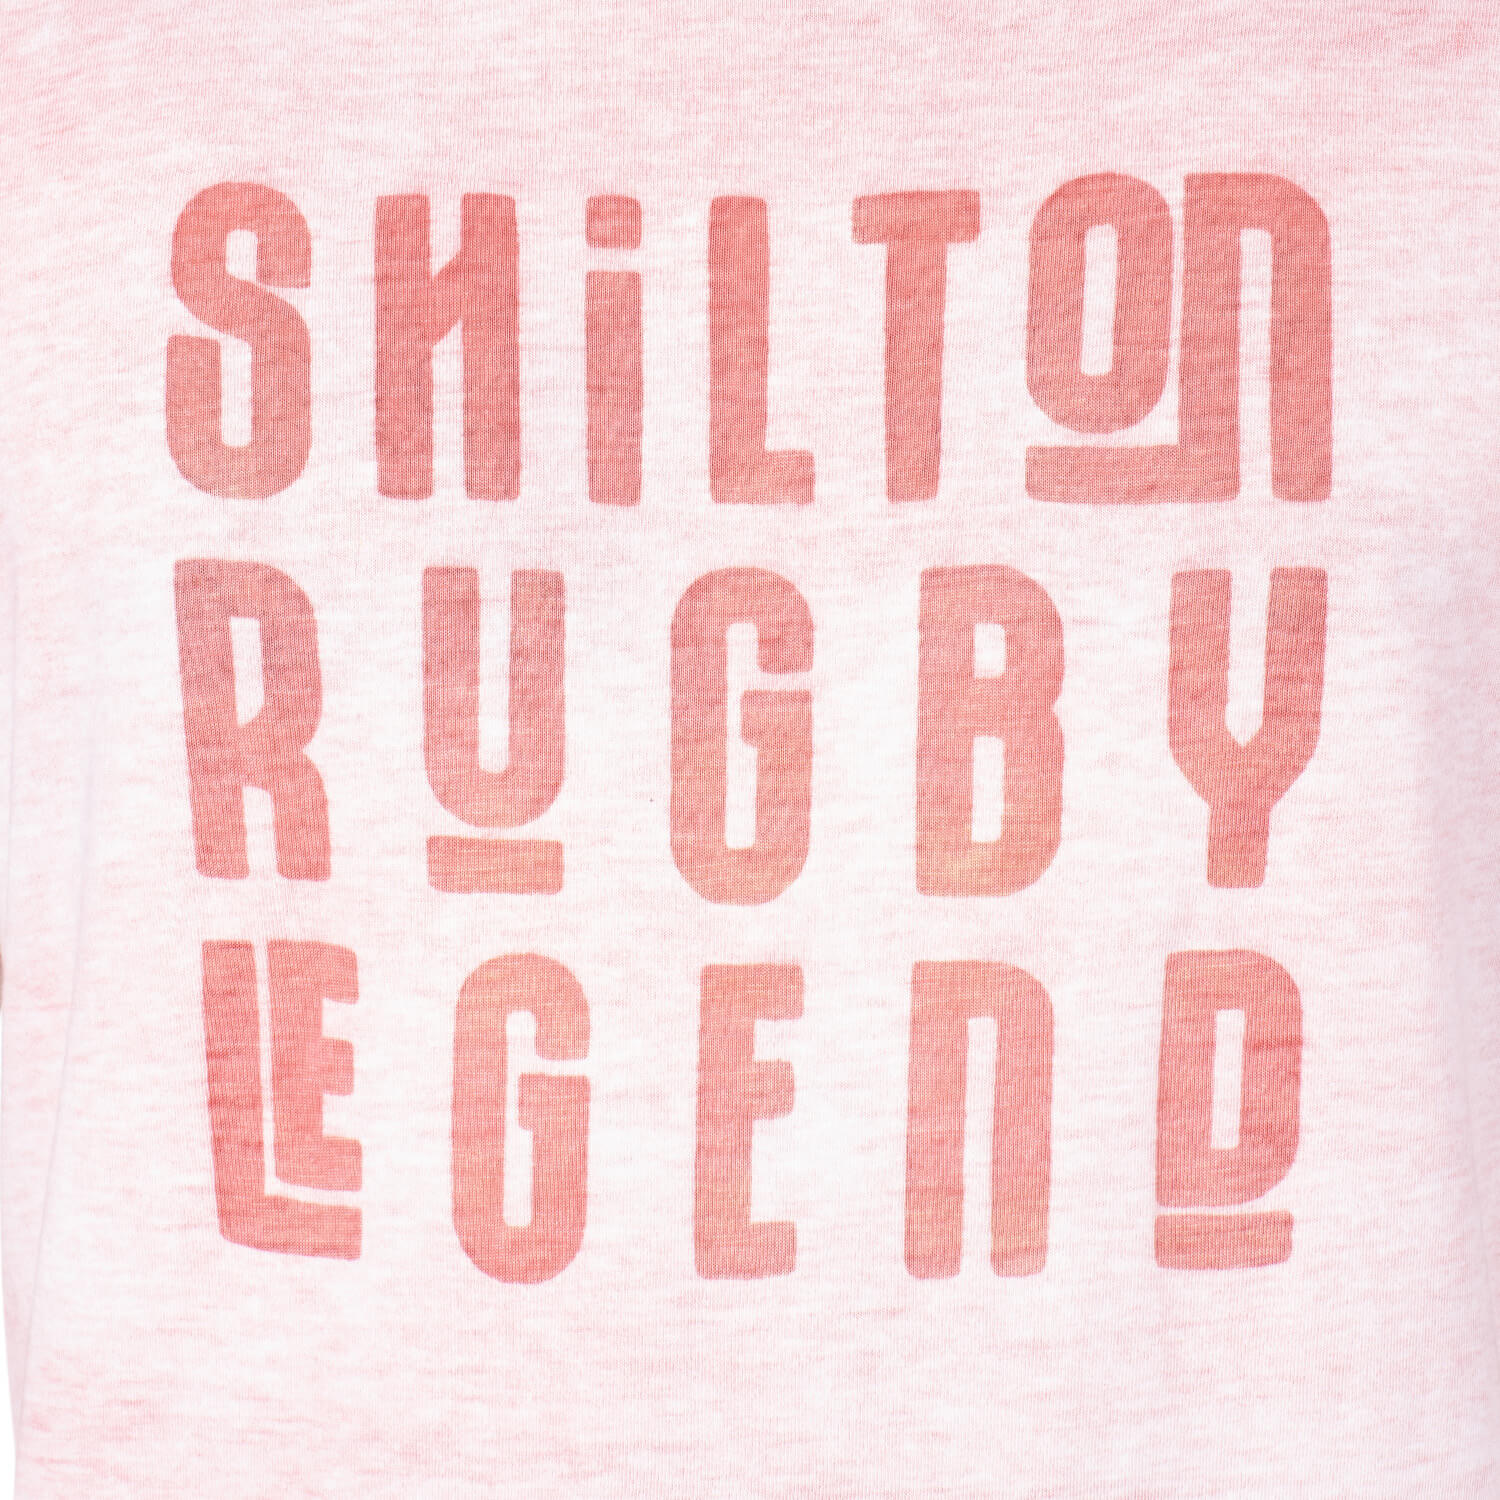 T Shirt Vintage Rugby Rouge